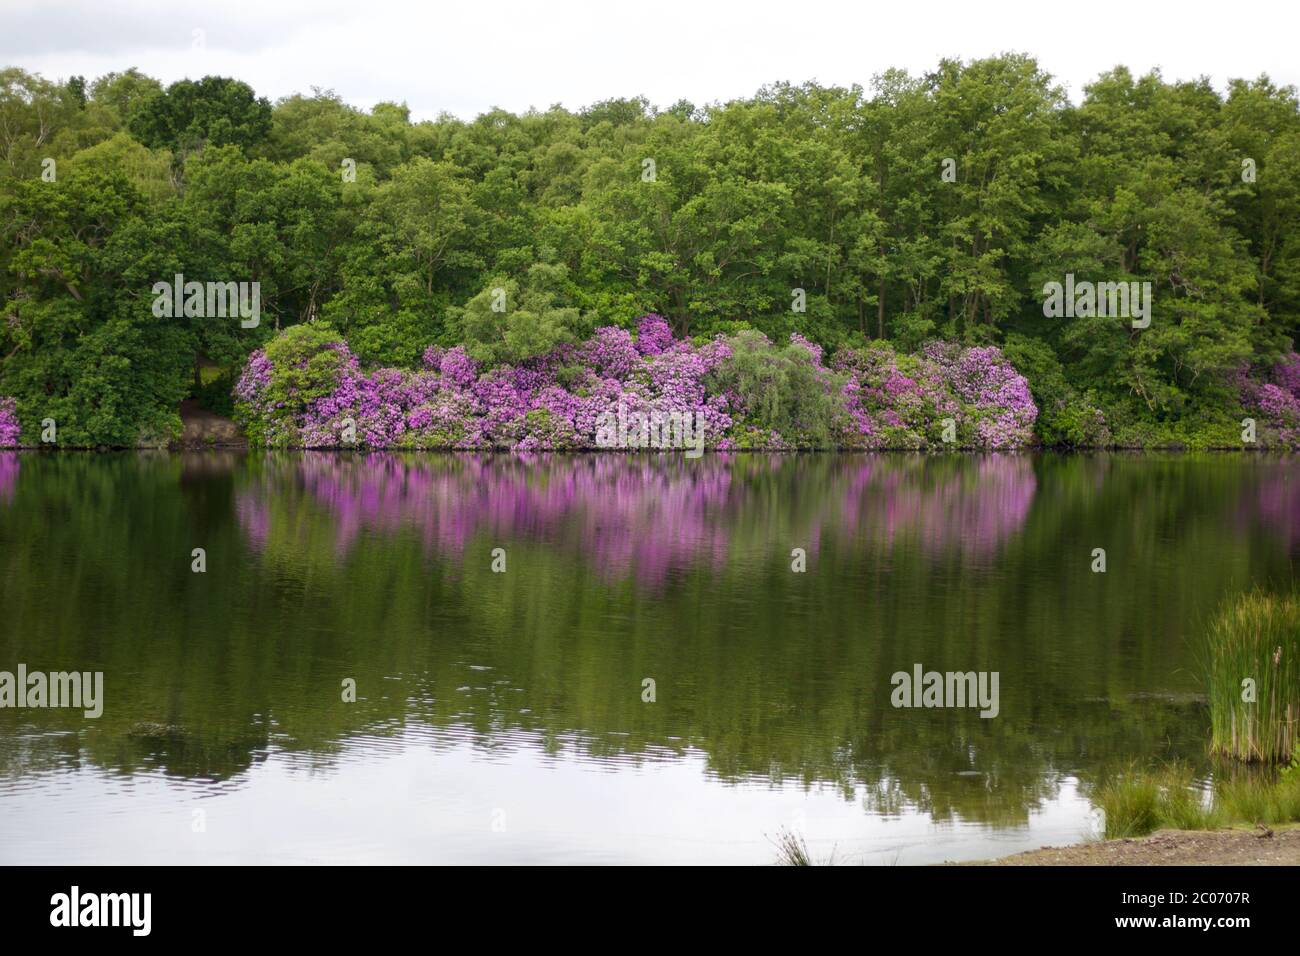 Beautiful lakeside scene showing trees and rhododendrons reflected in water Stock Photo